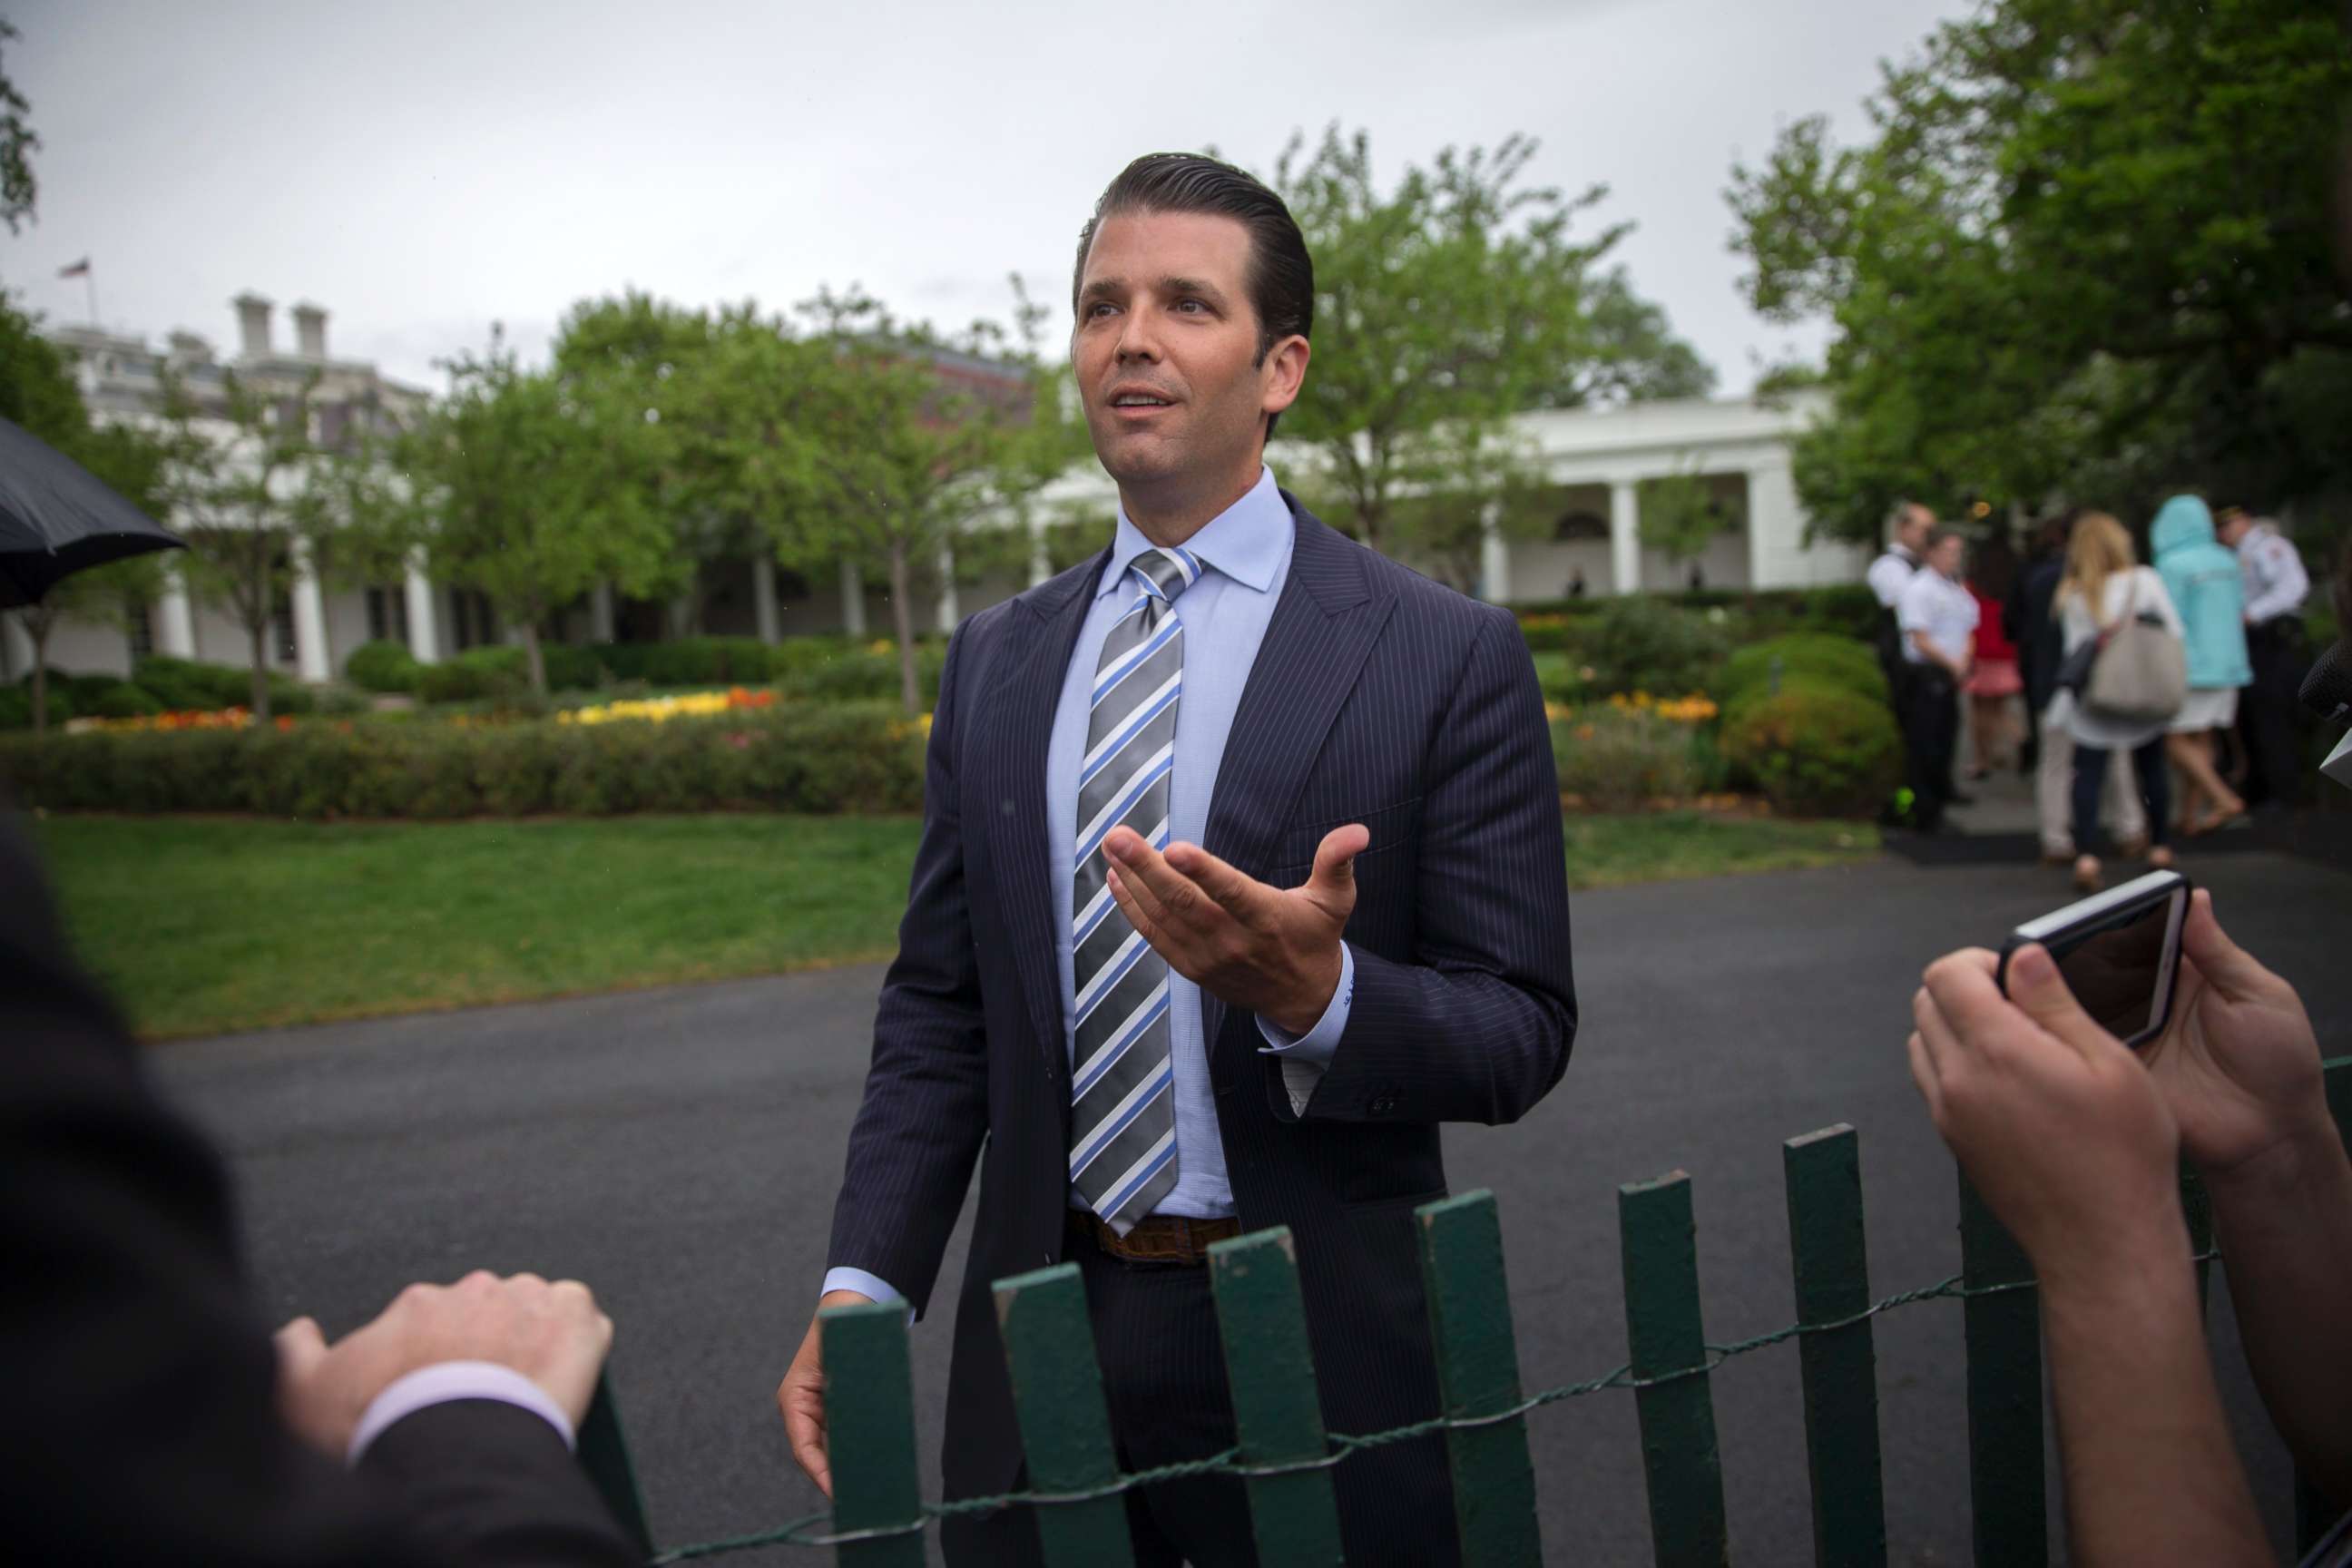 PHOTO: Donald Trump Jr. talks to reporters during the White House Easter Egg Roll on the South Lawn of the White House in Washington, April 17, 2017.